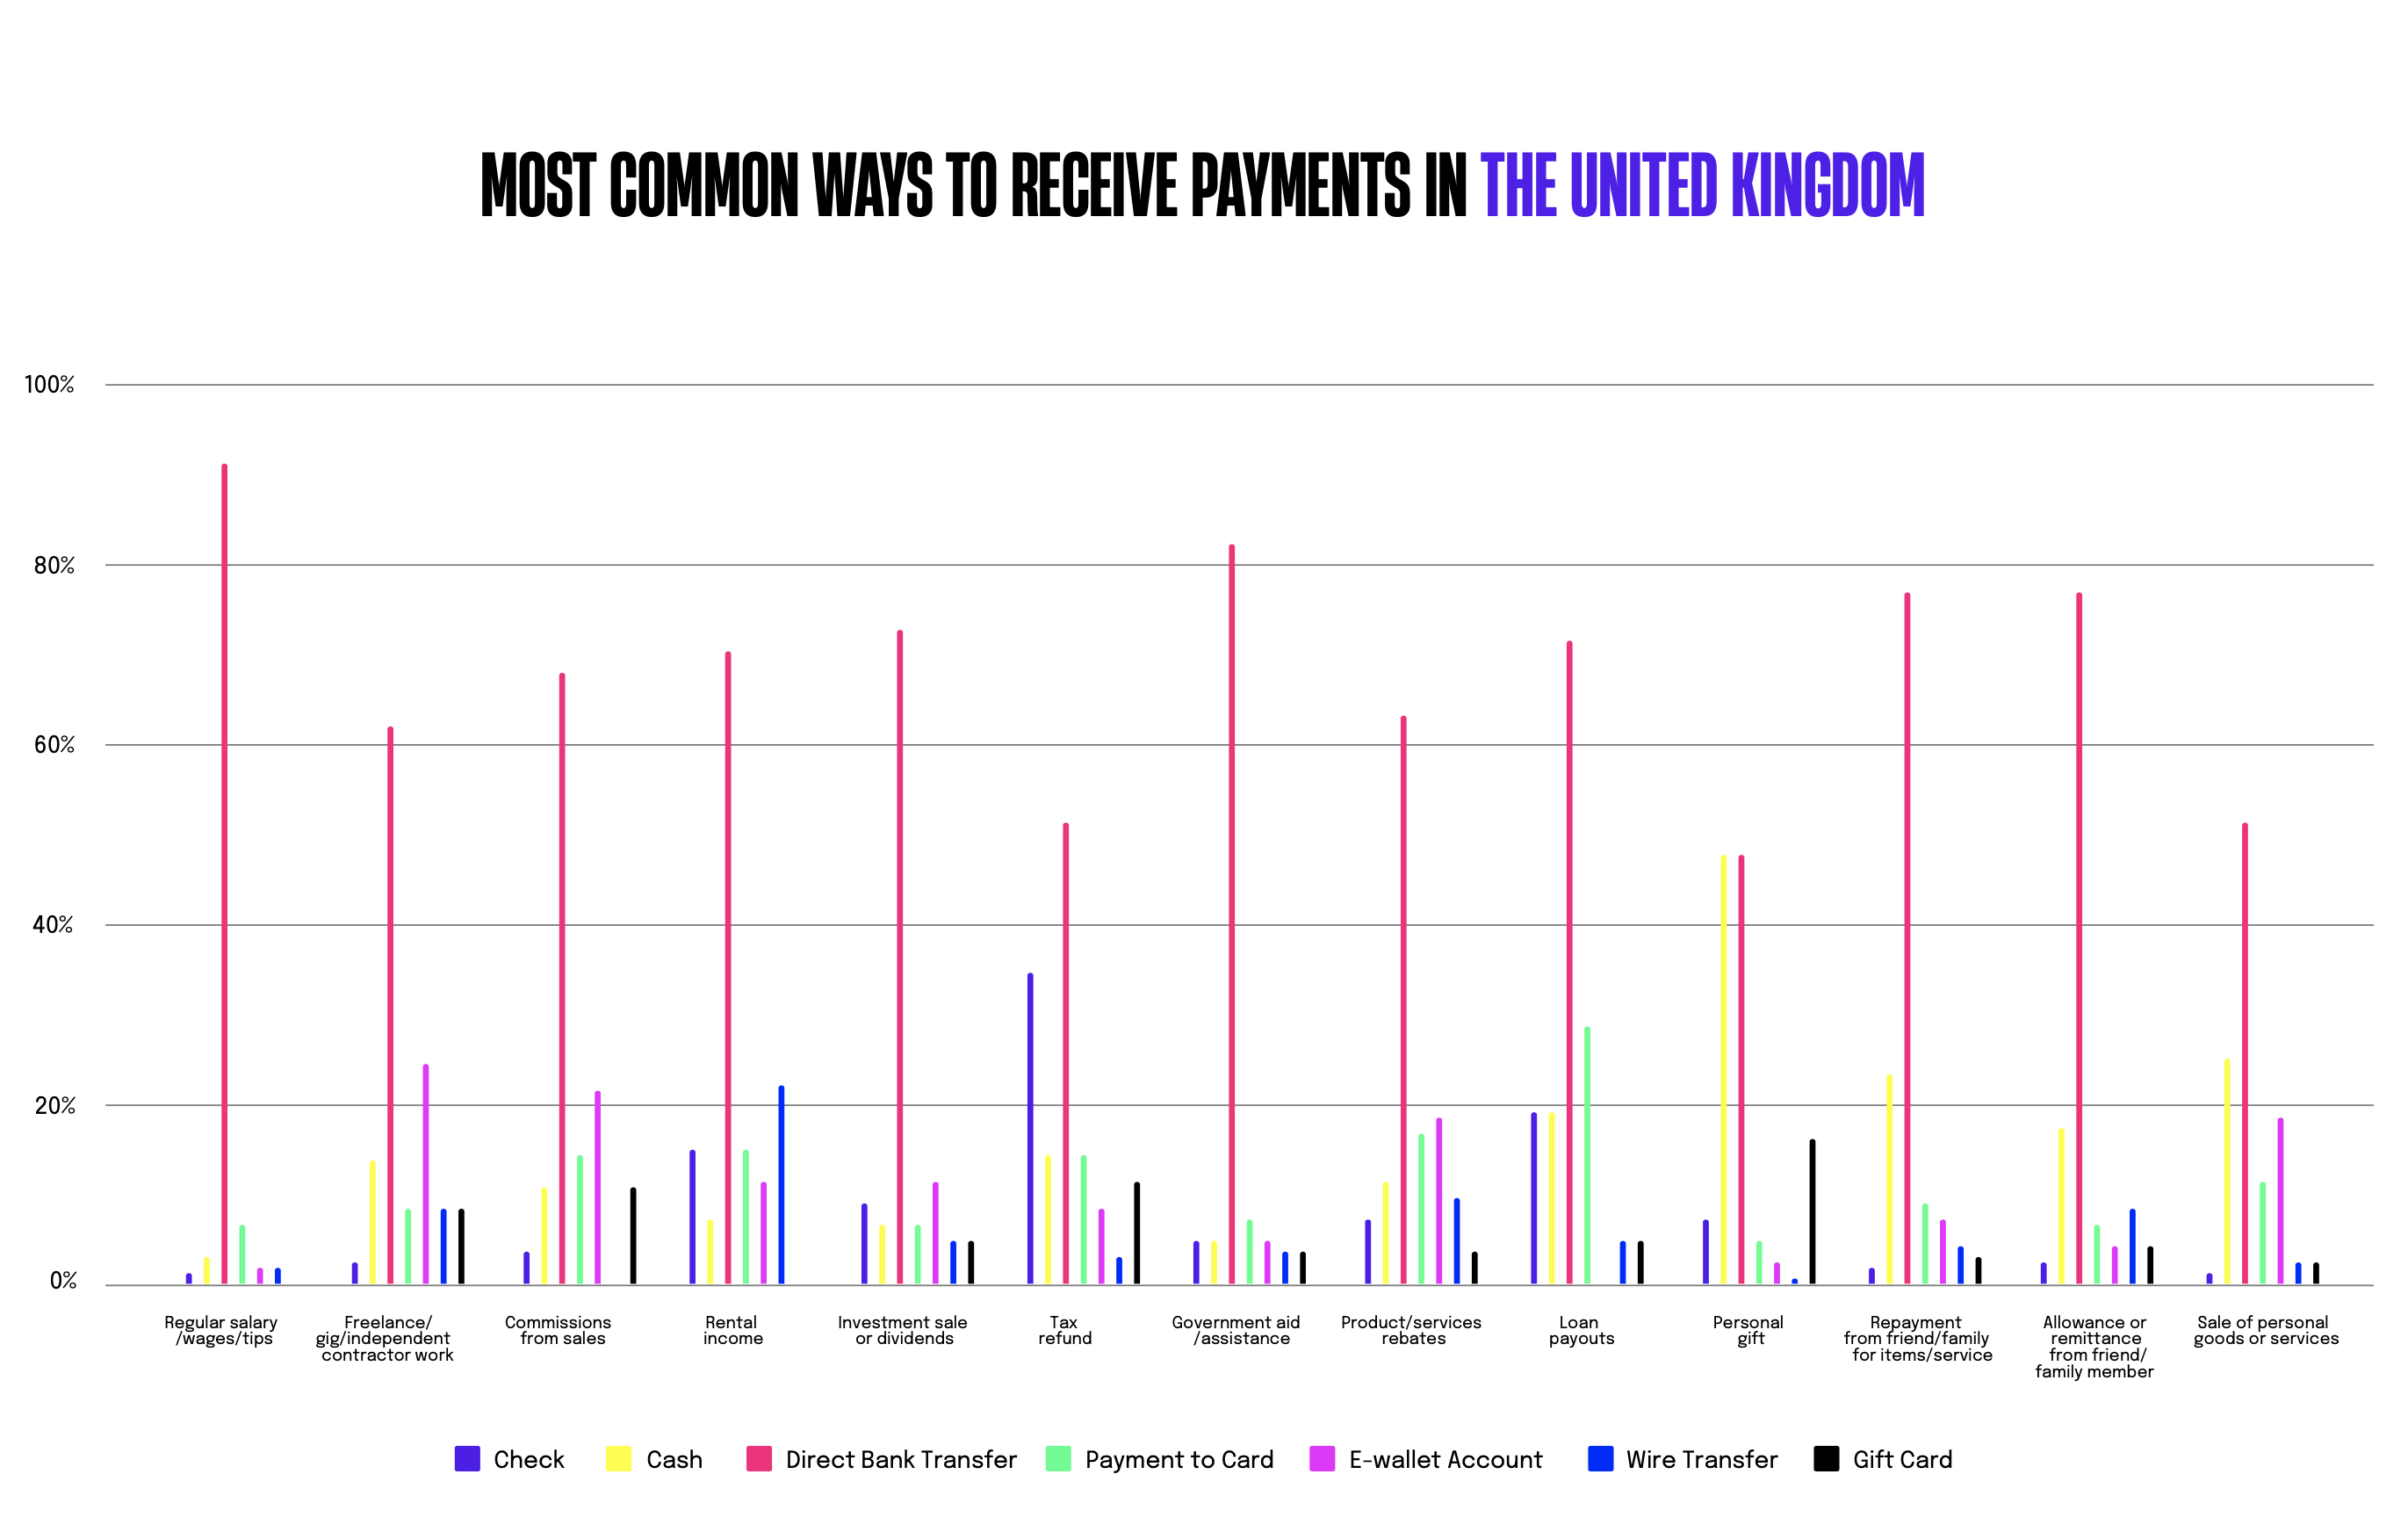 Chart: The most common ways to receive payments in the UK